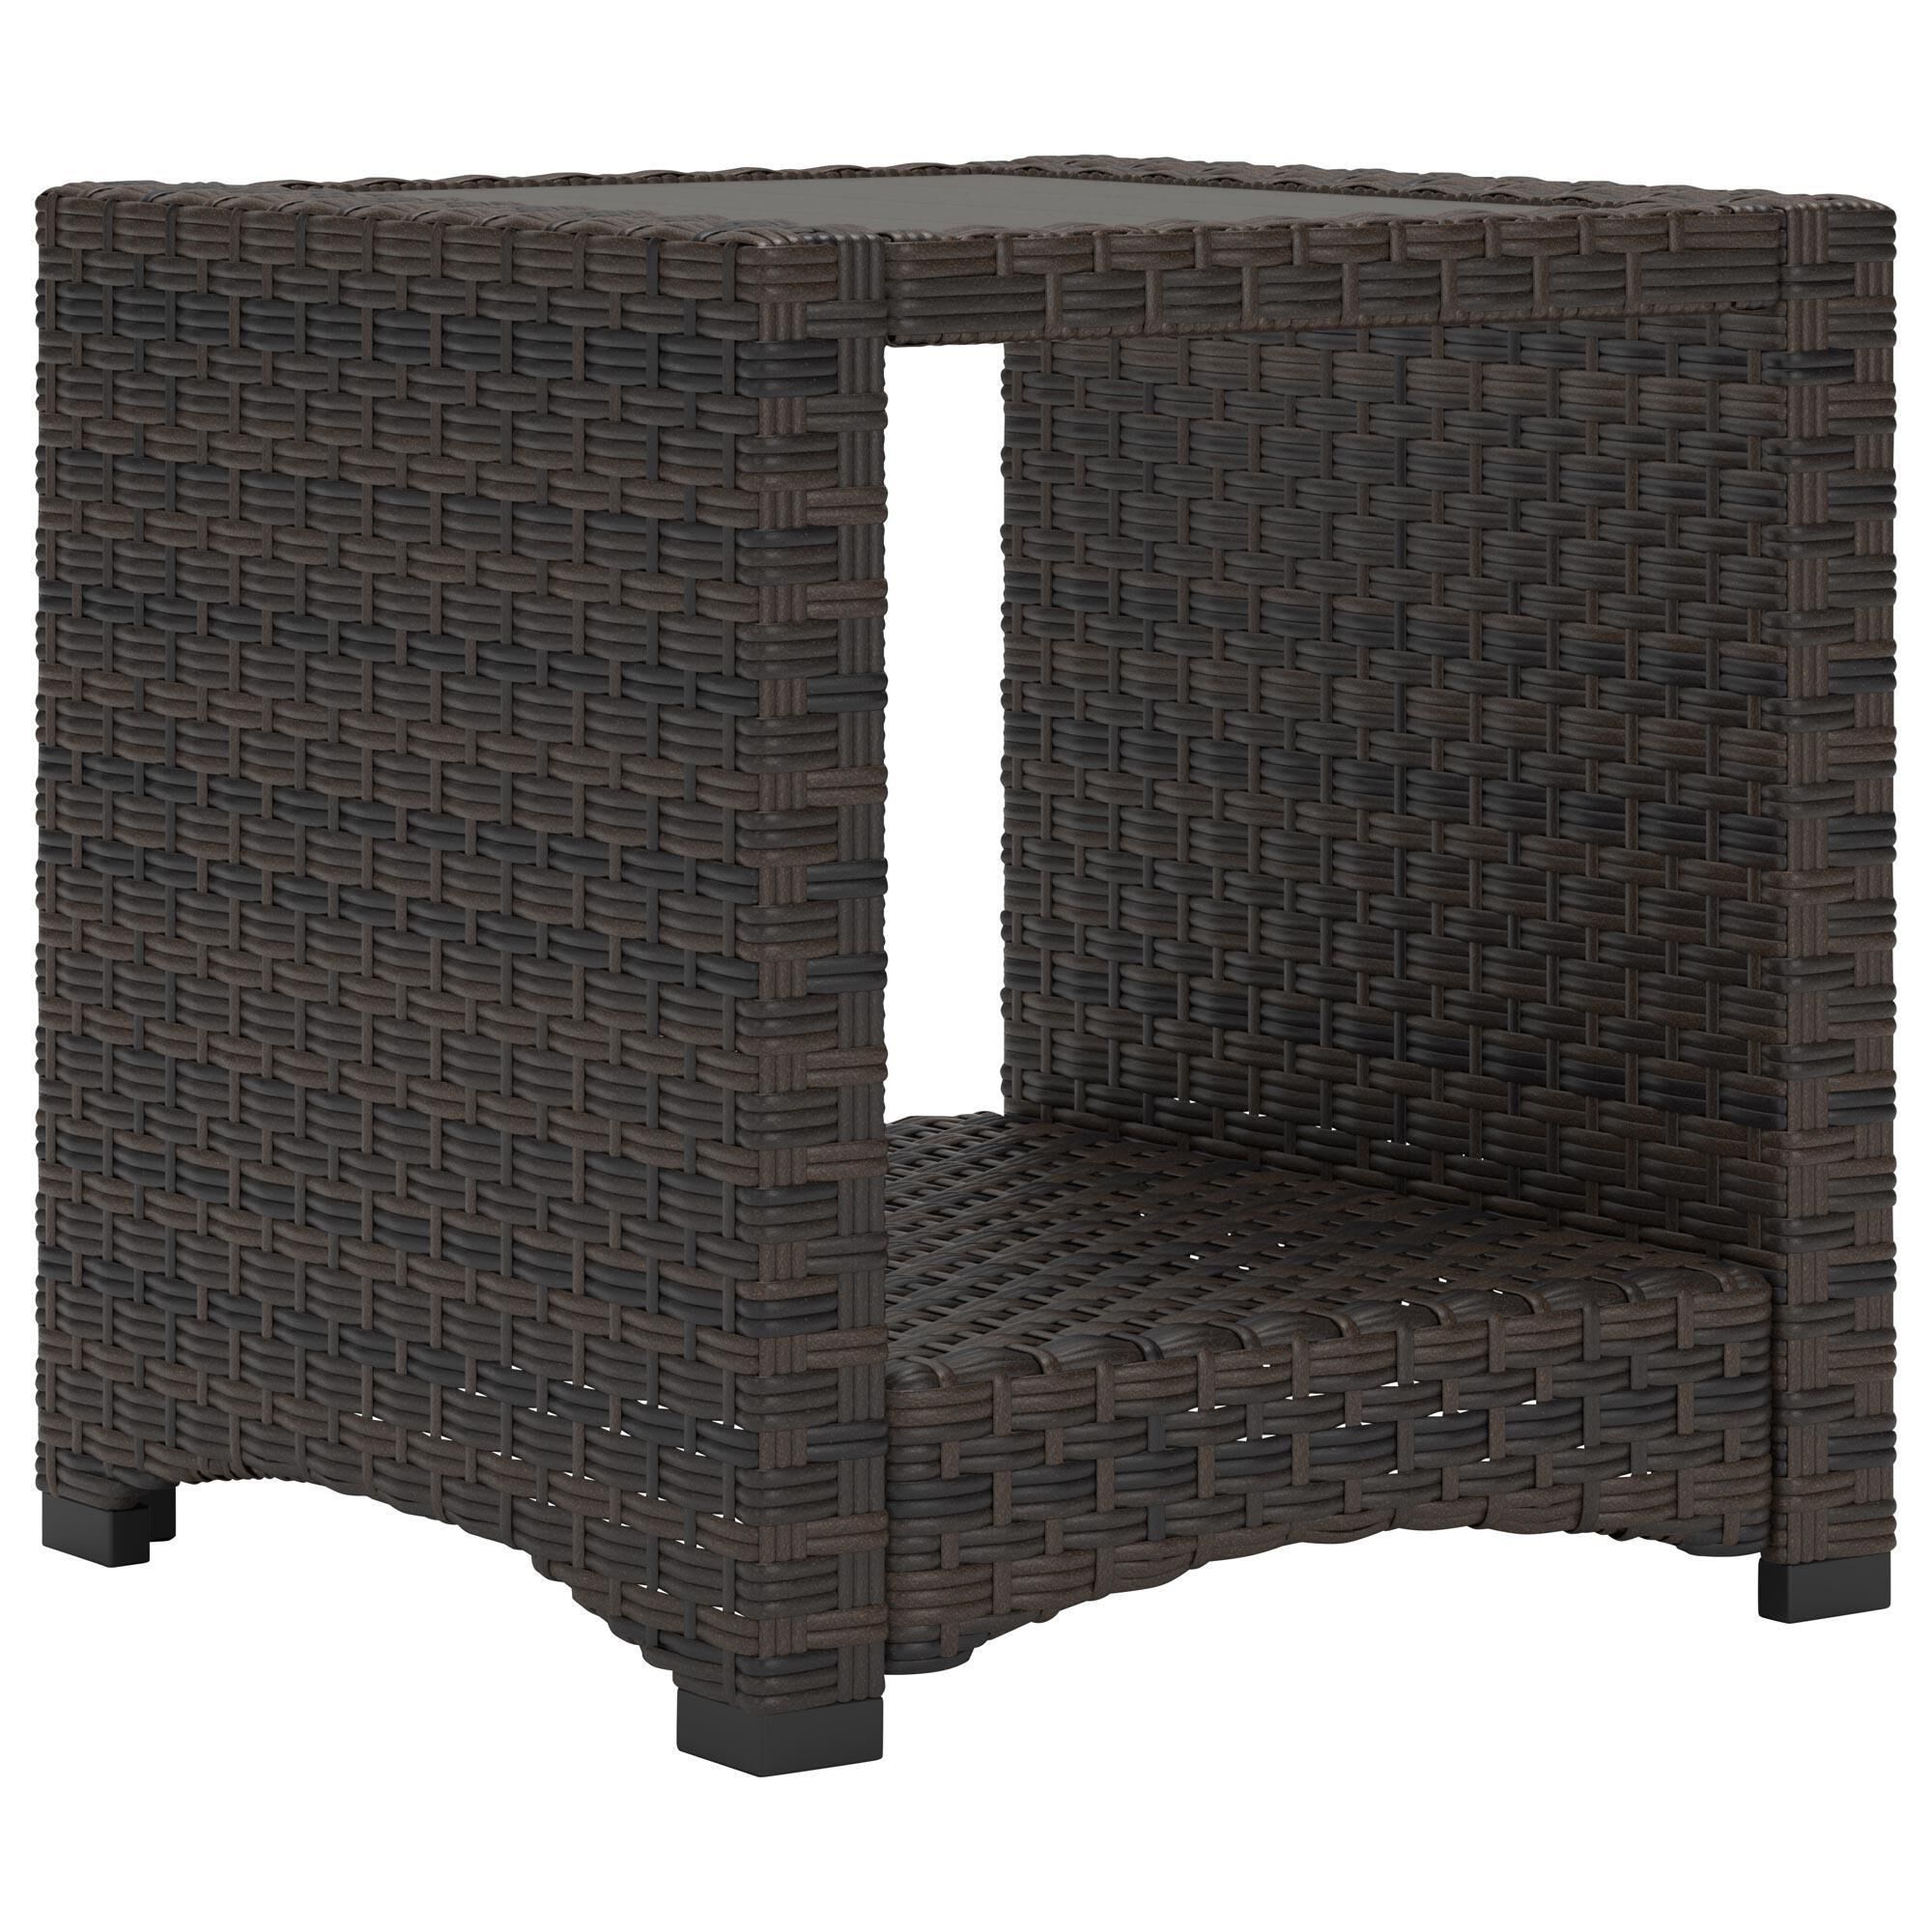 Signature Design by Ashley Windglow Patio End Table in Brown - Table Only |  NFM